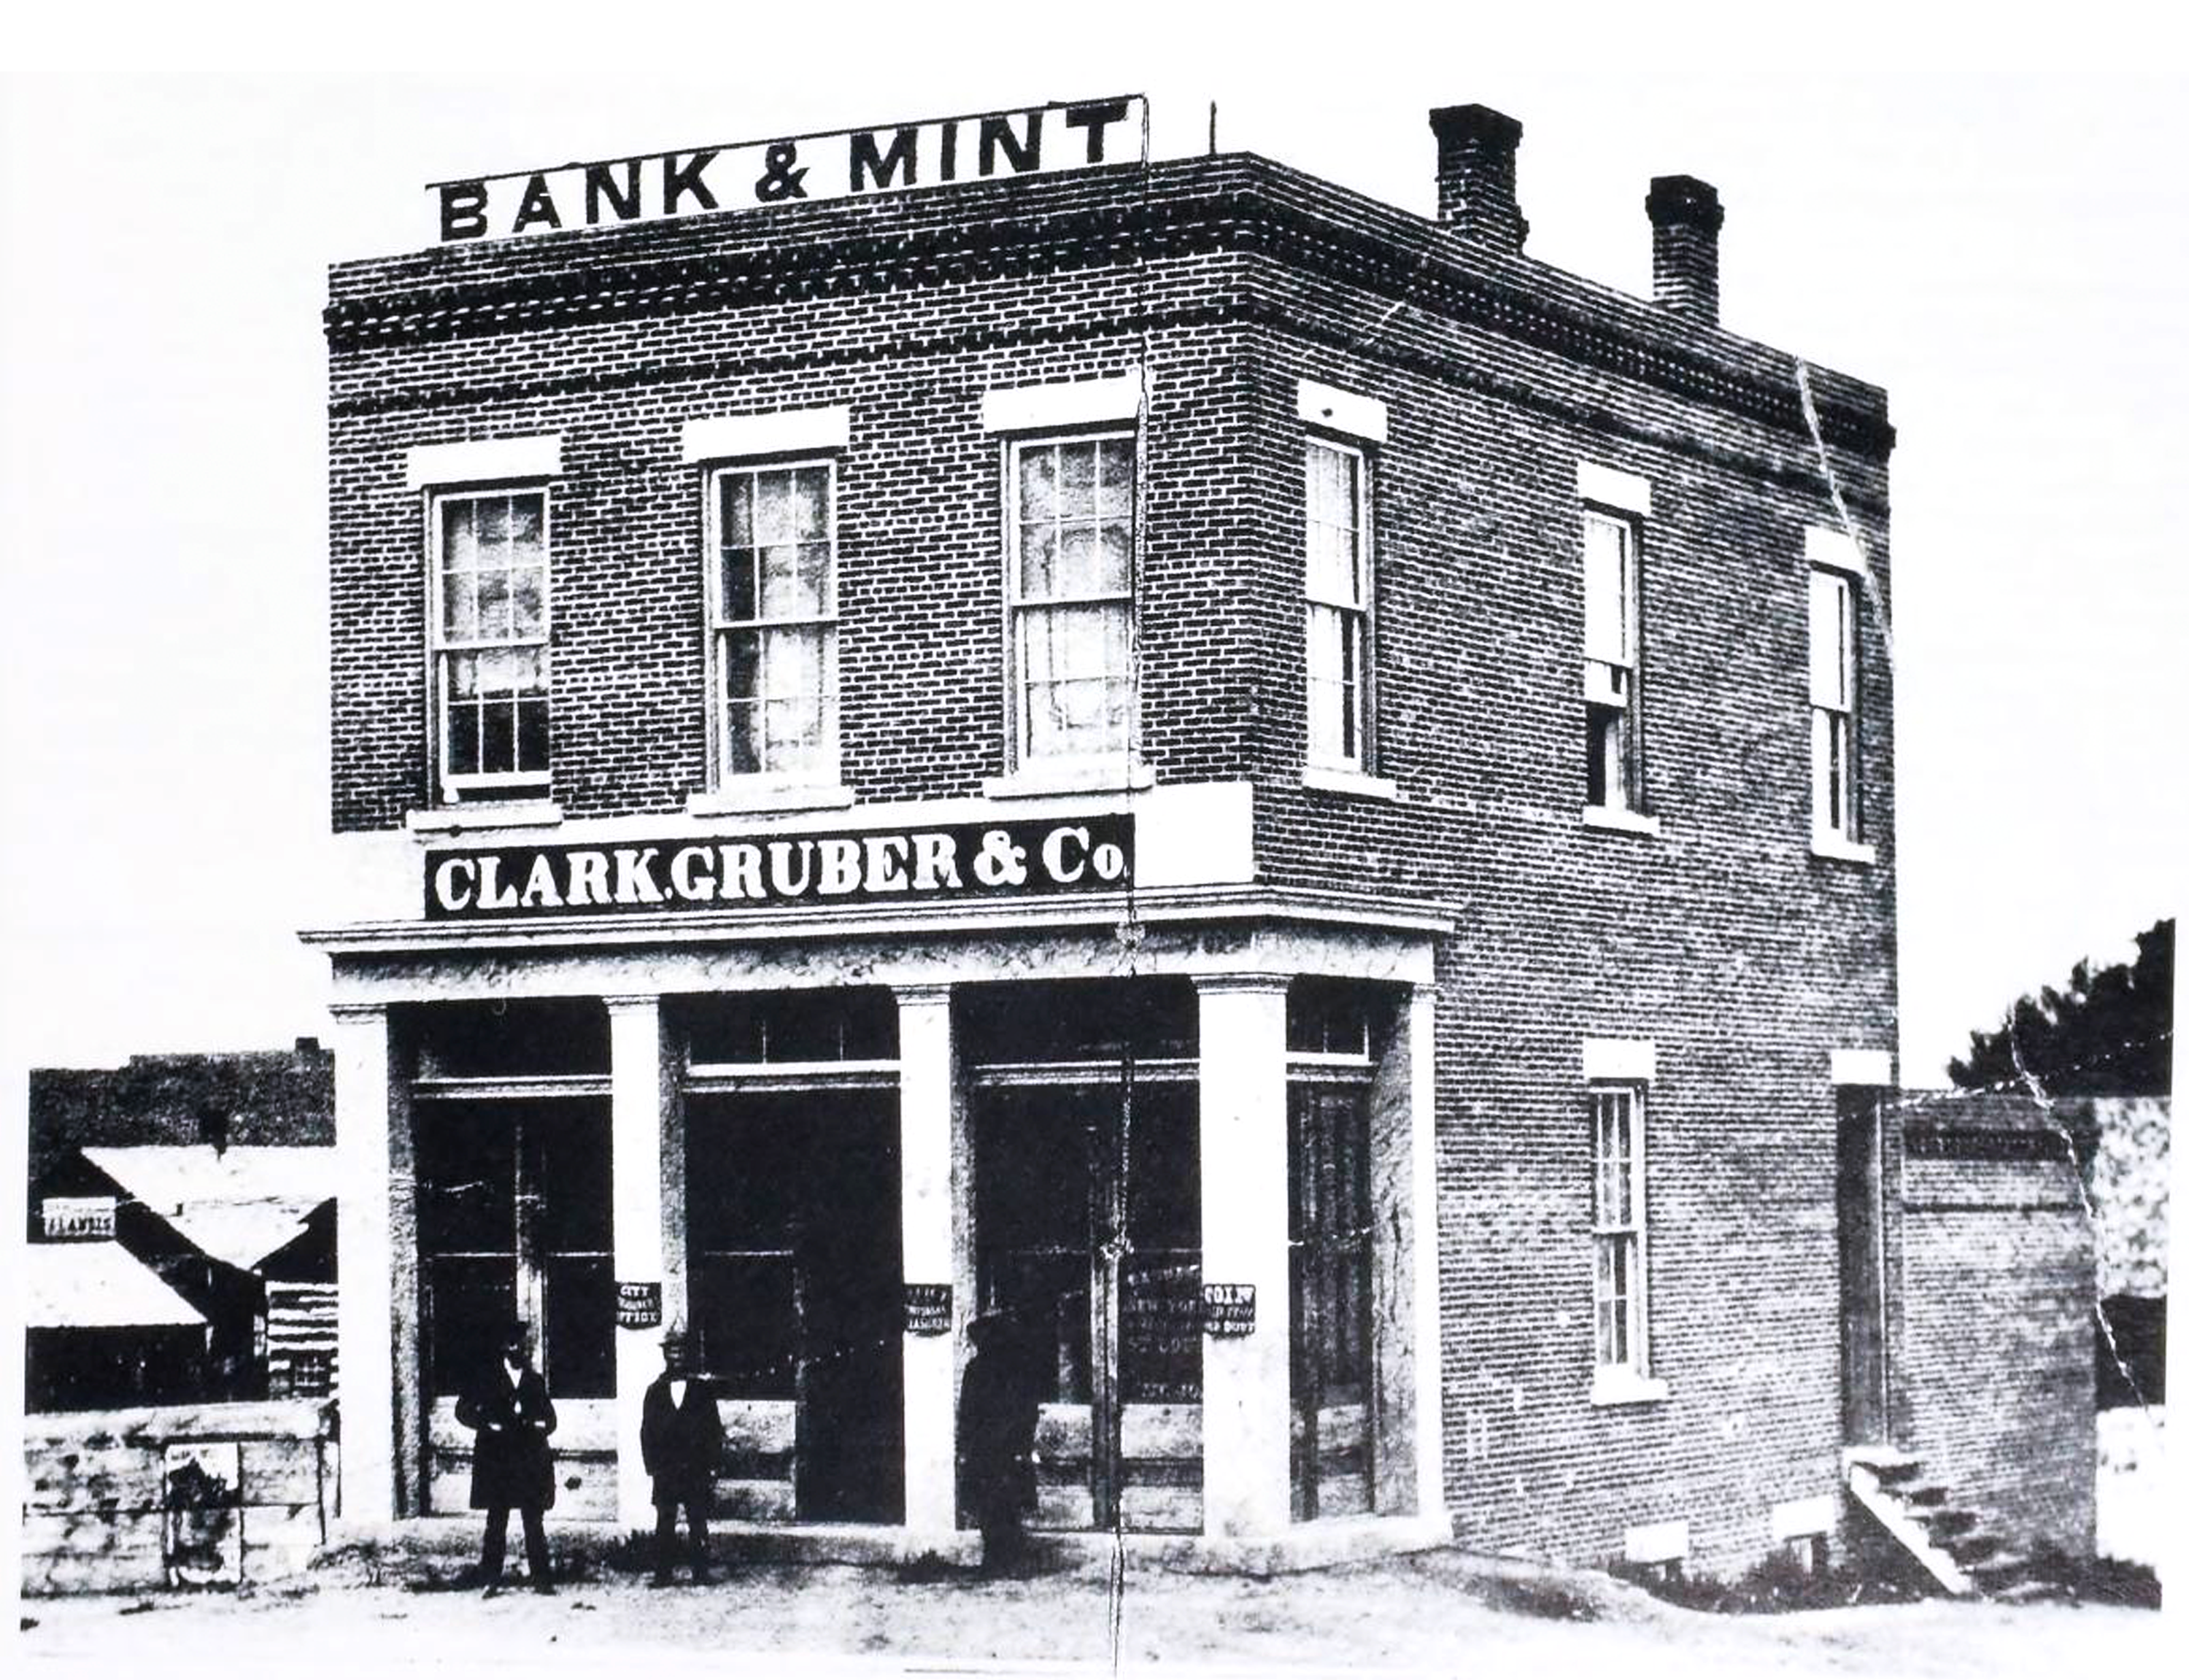 clark gruber and company store front building